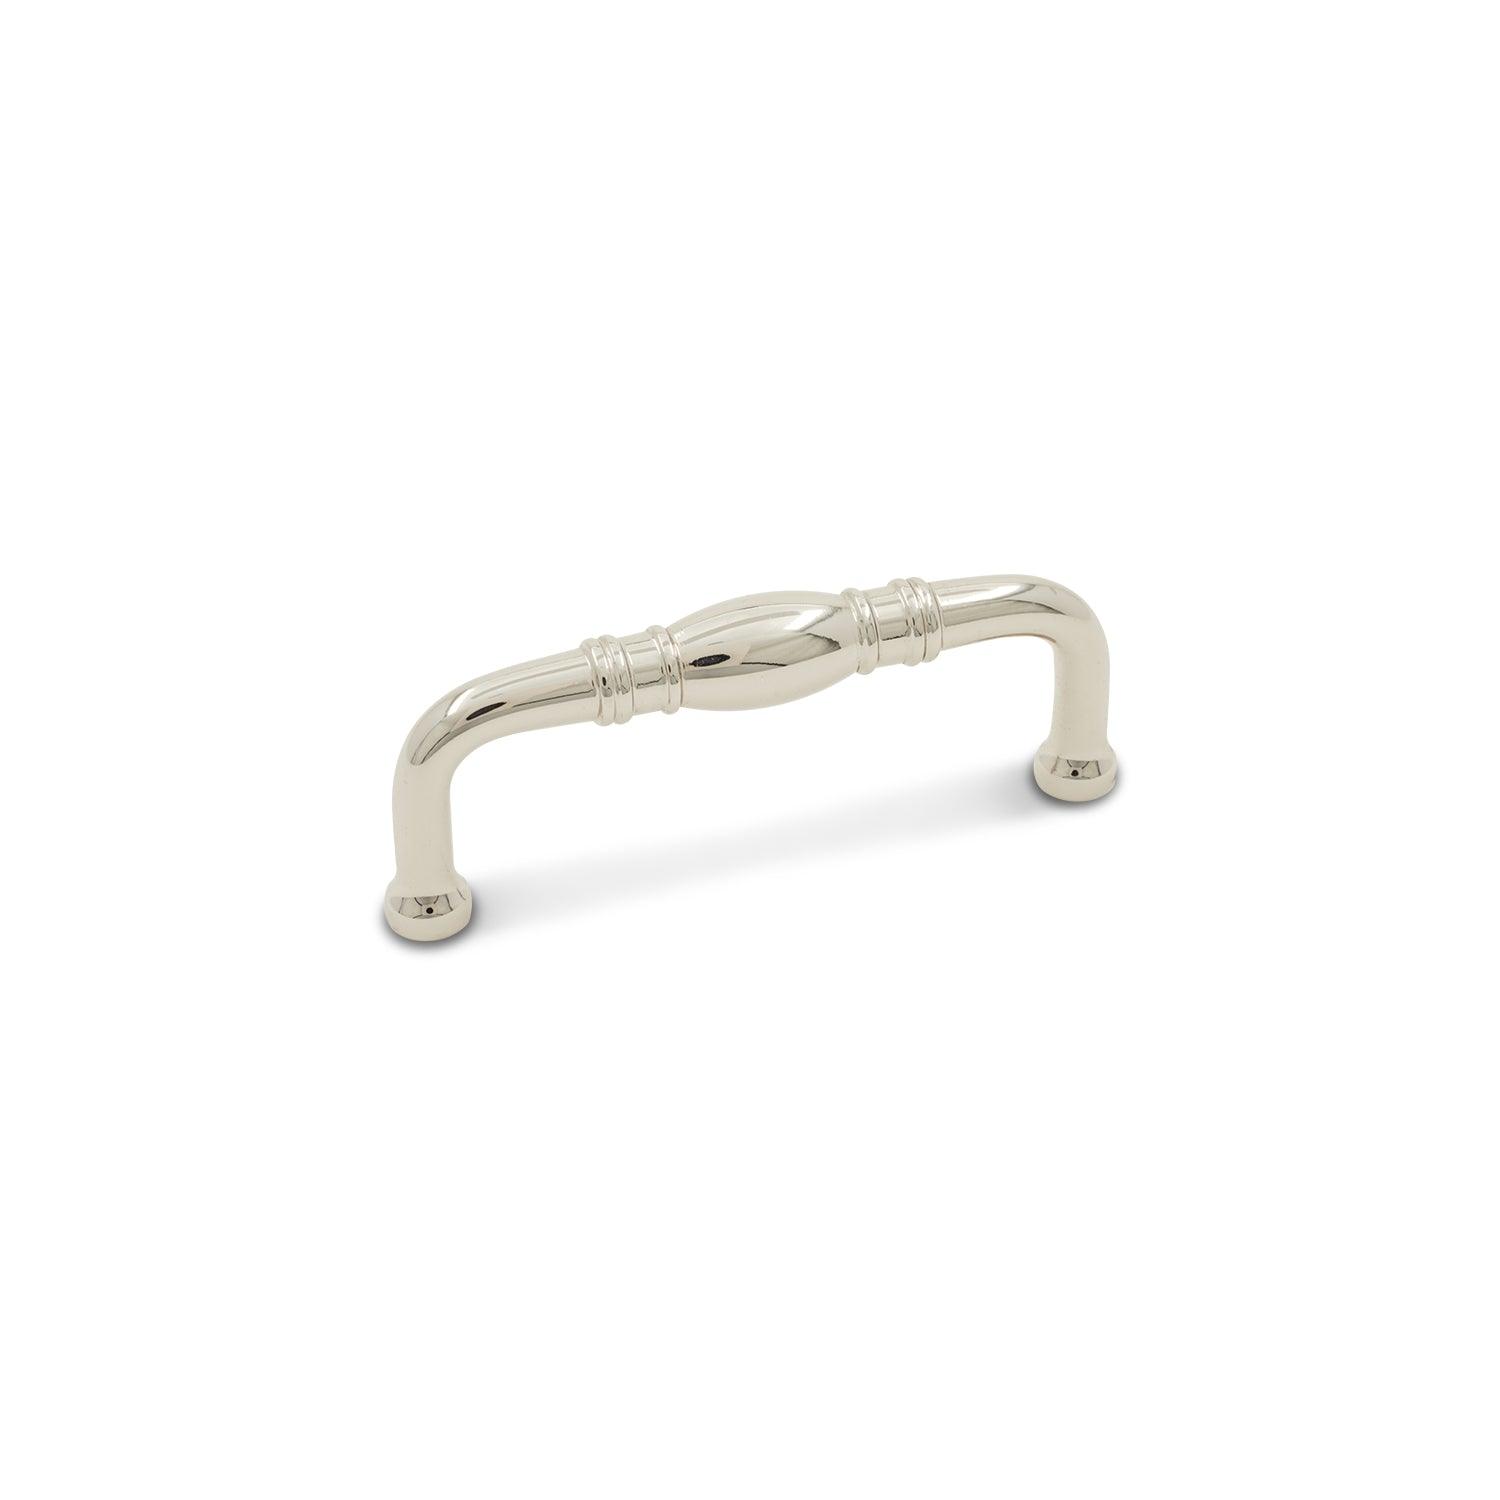 RKI - Barrel Middle Collection - Cabinet Pull - APex Hardware NY 